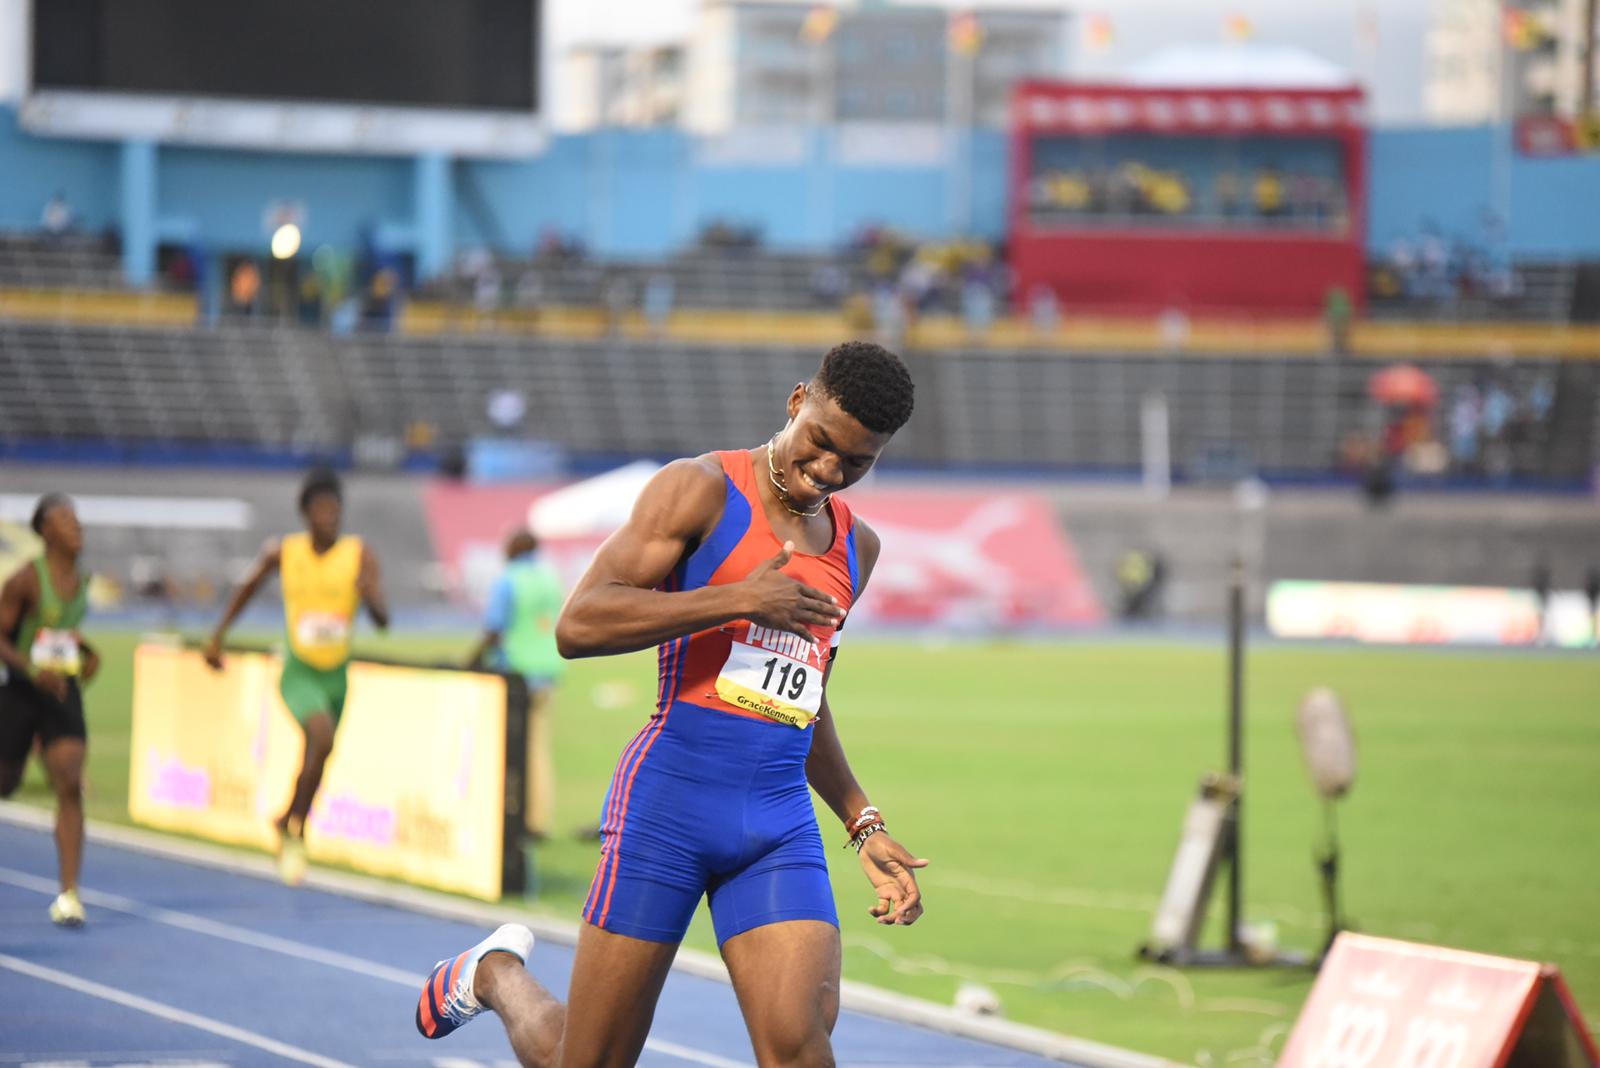 Roshawn Clarke of Camperdown High wins the Class 1 boys' 400m hurdles in a record 49.50